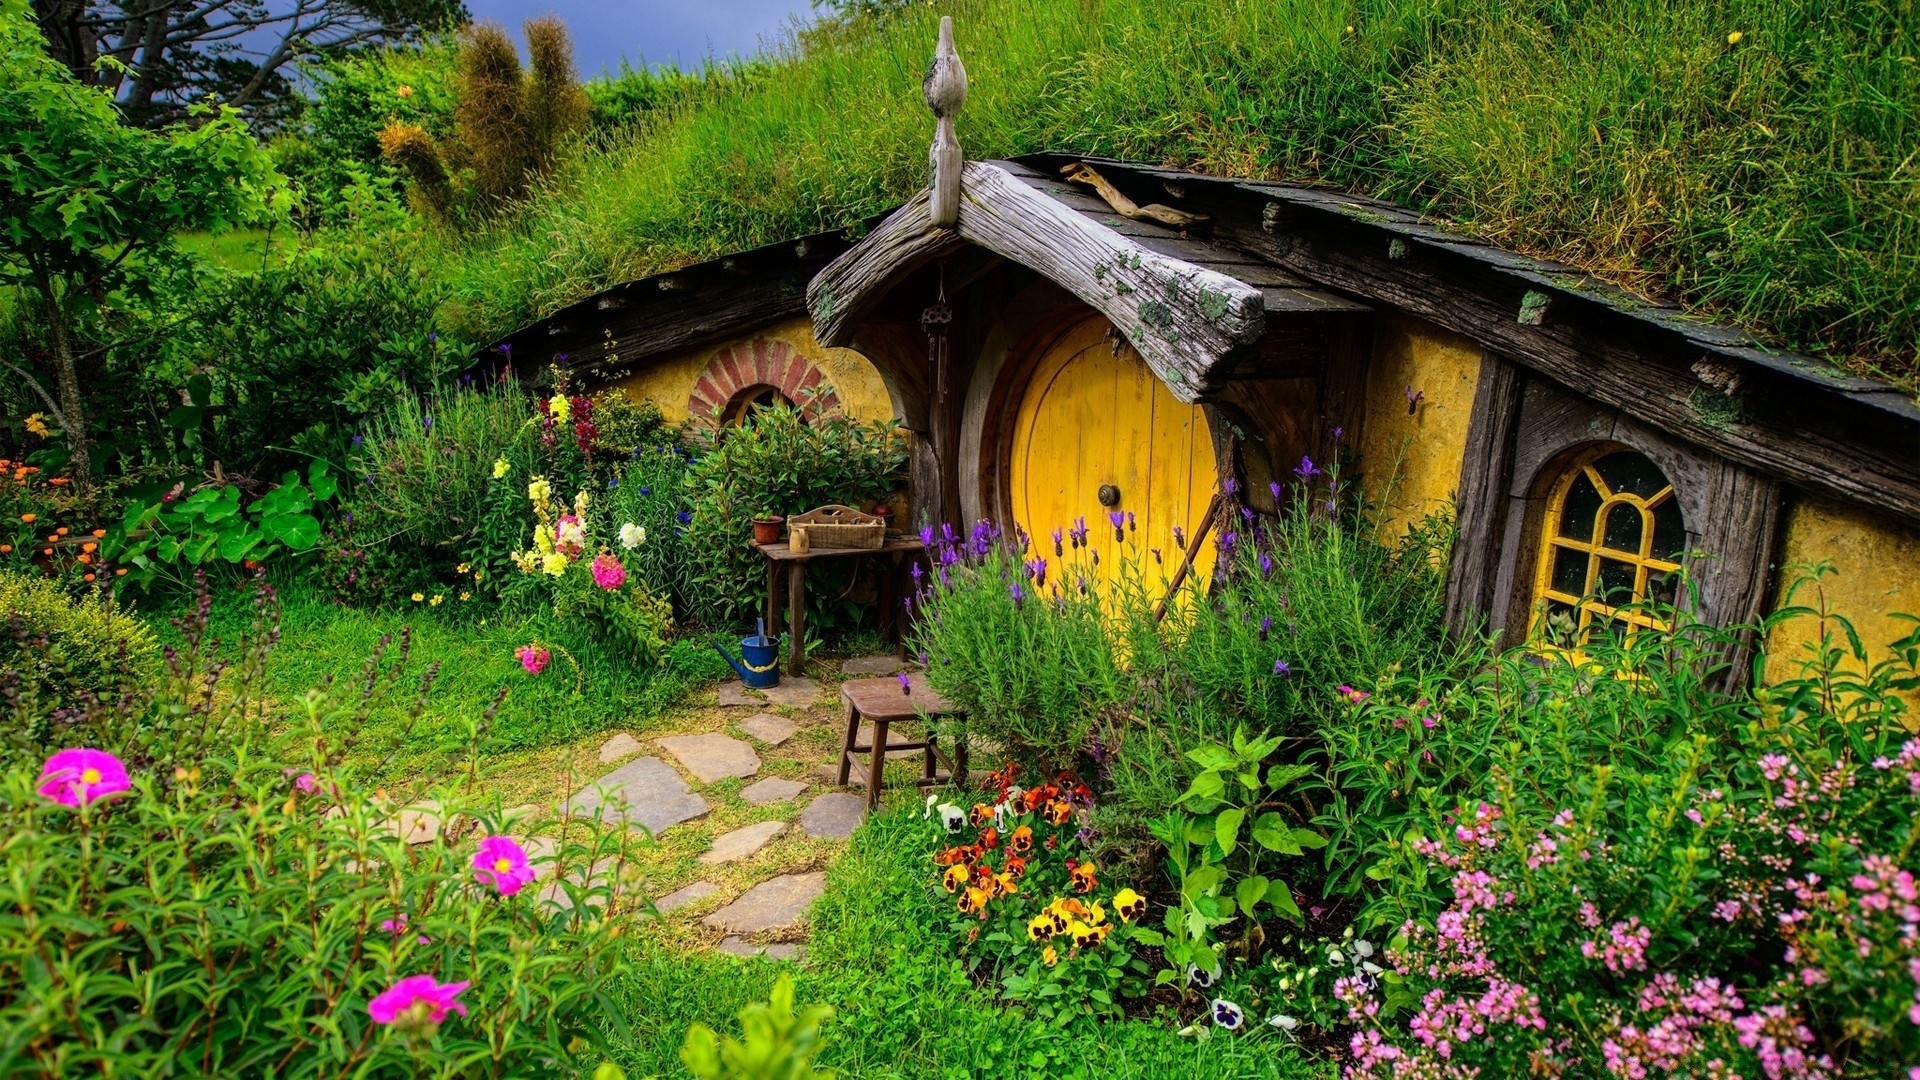 the hobbit flower garden house grass summer architecture building yard family wood lawn outdoors travel bungalow flora home nature